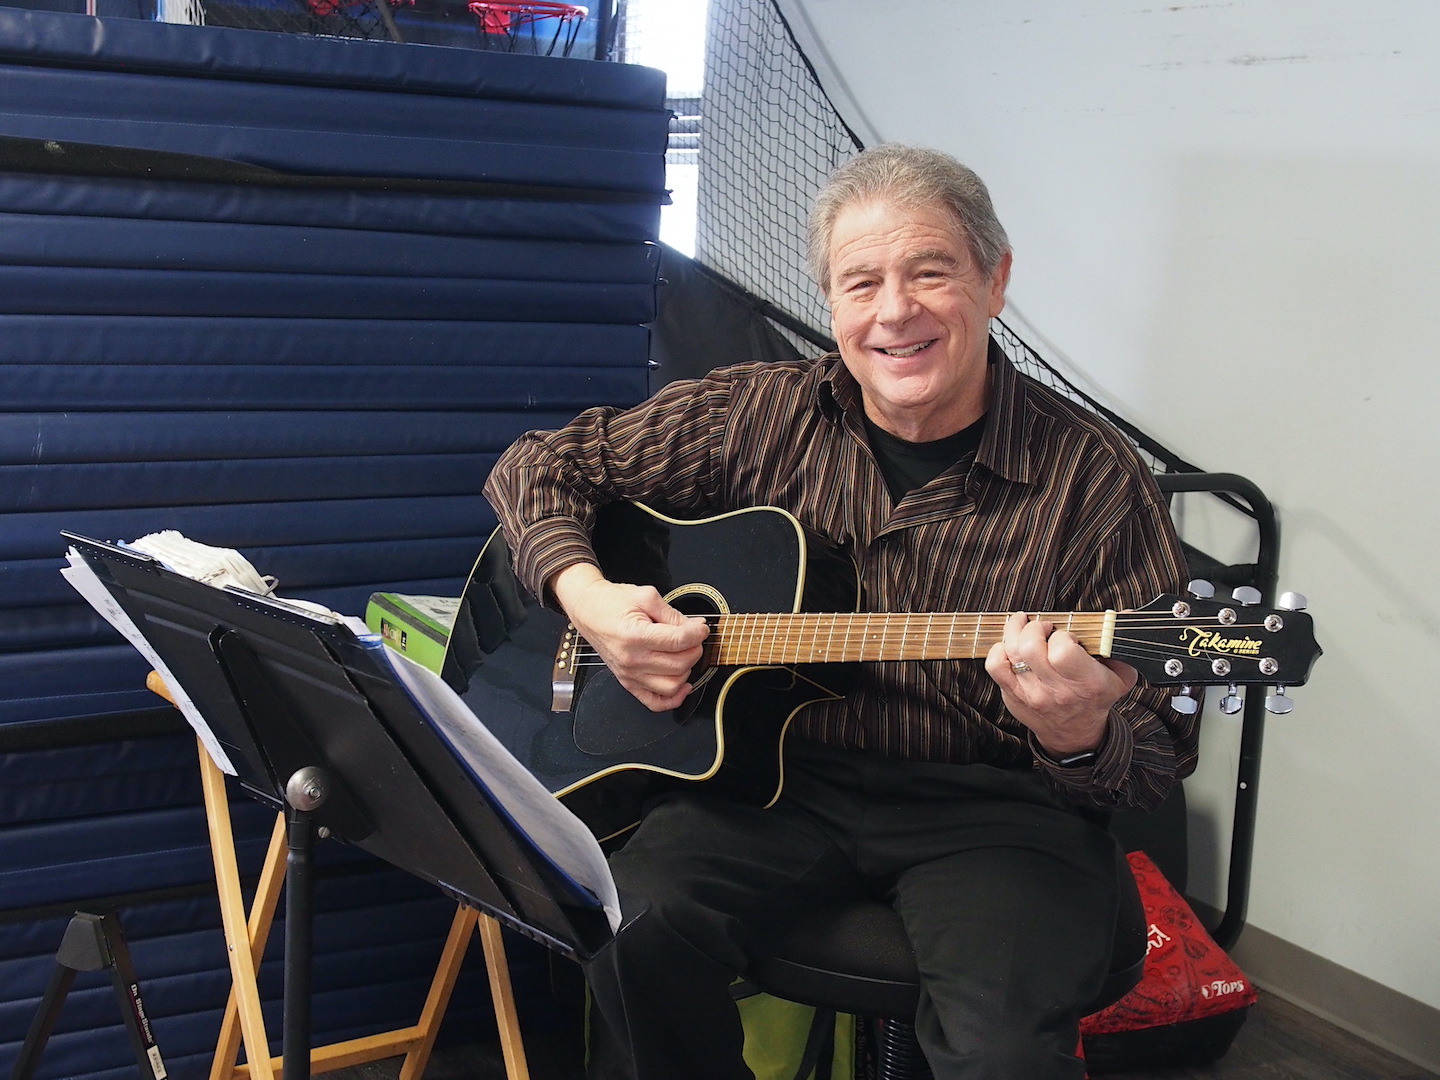 Ray Braselton, who teaches guitar lessons at the Nike Base, serenades visitors to the Community Center.